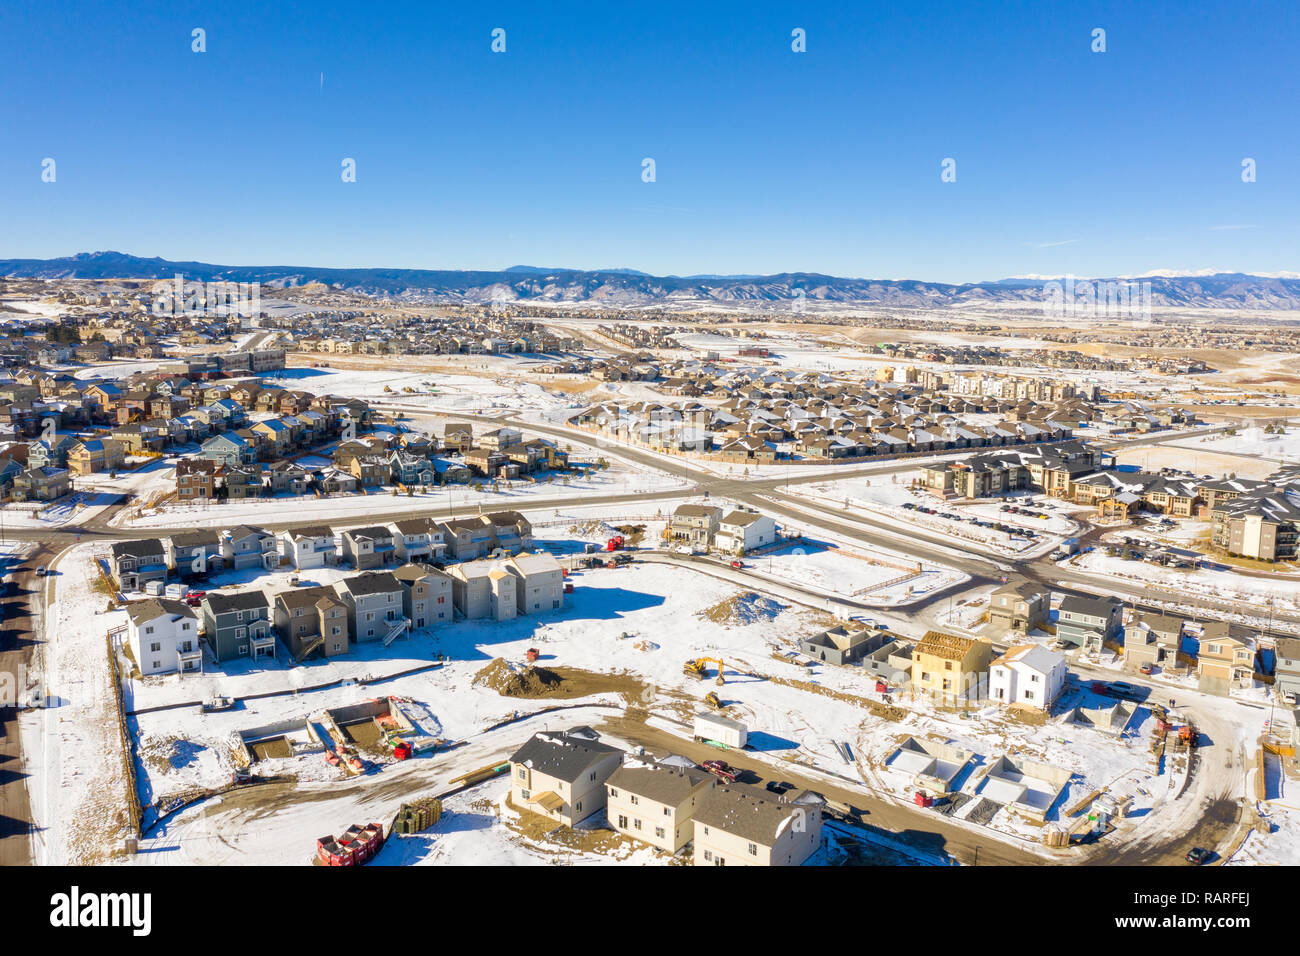 A great photo illustrating the Colorado housing boom as it continues even in the winter snow Stock Photo